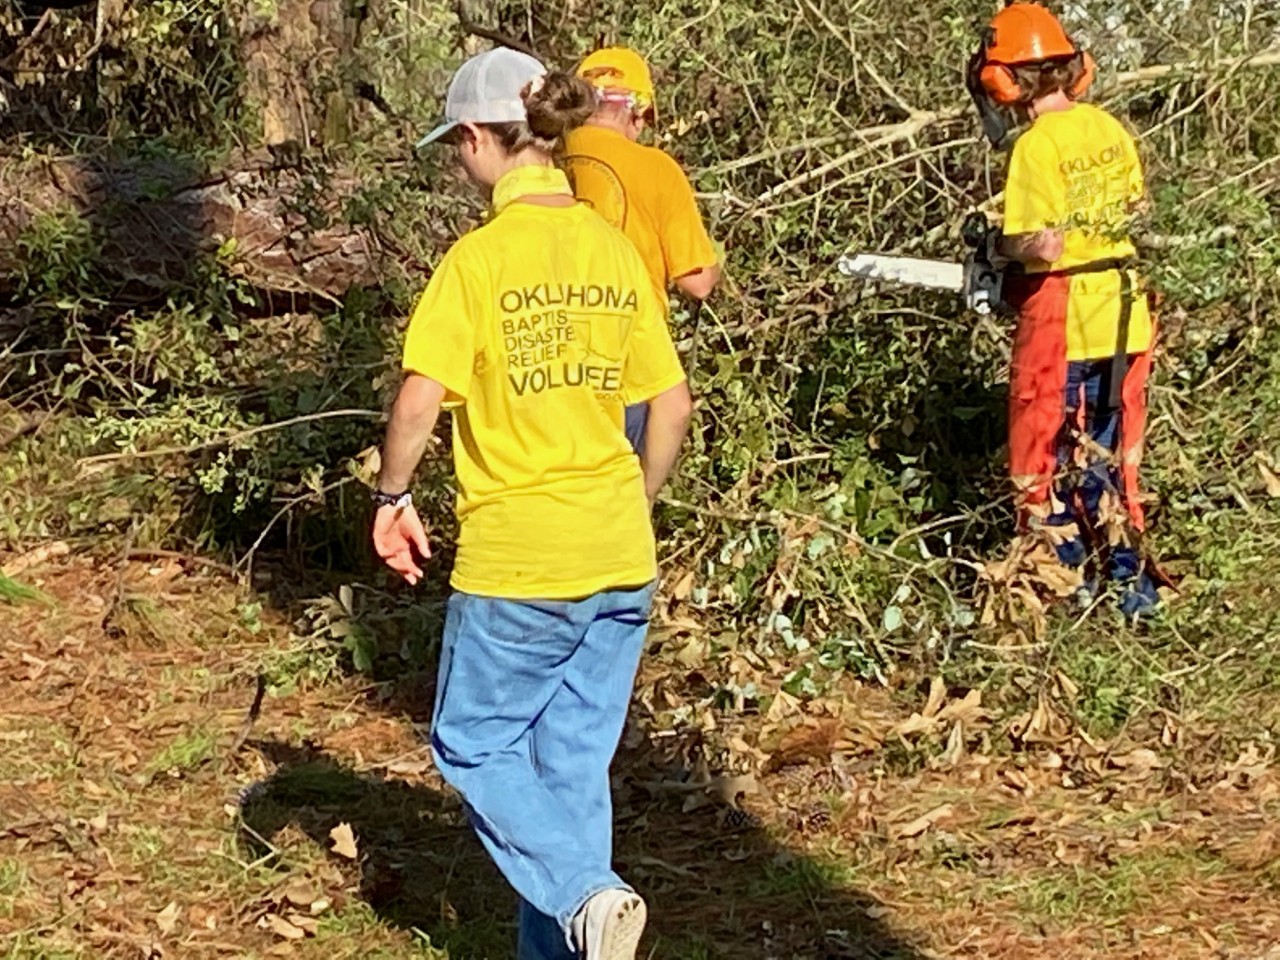 Oklahoma Baptist Disaster Relief ‘doing the job’ in Louisiana, reports 13 professing faith in Christ